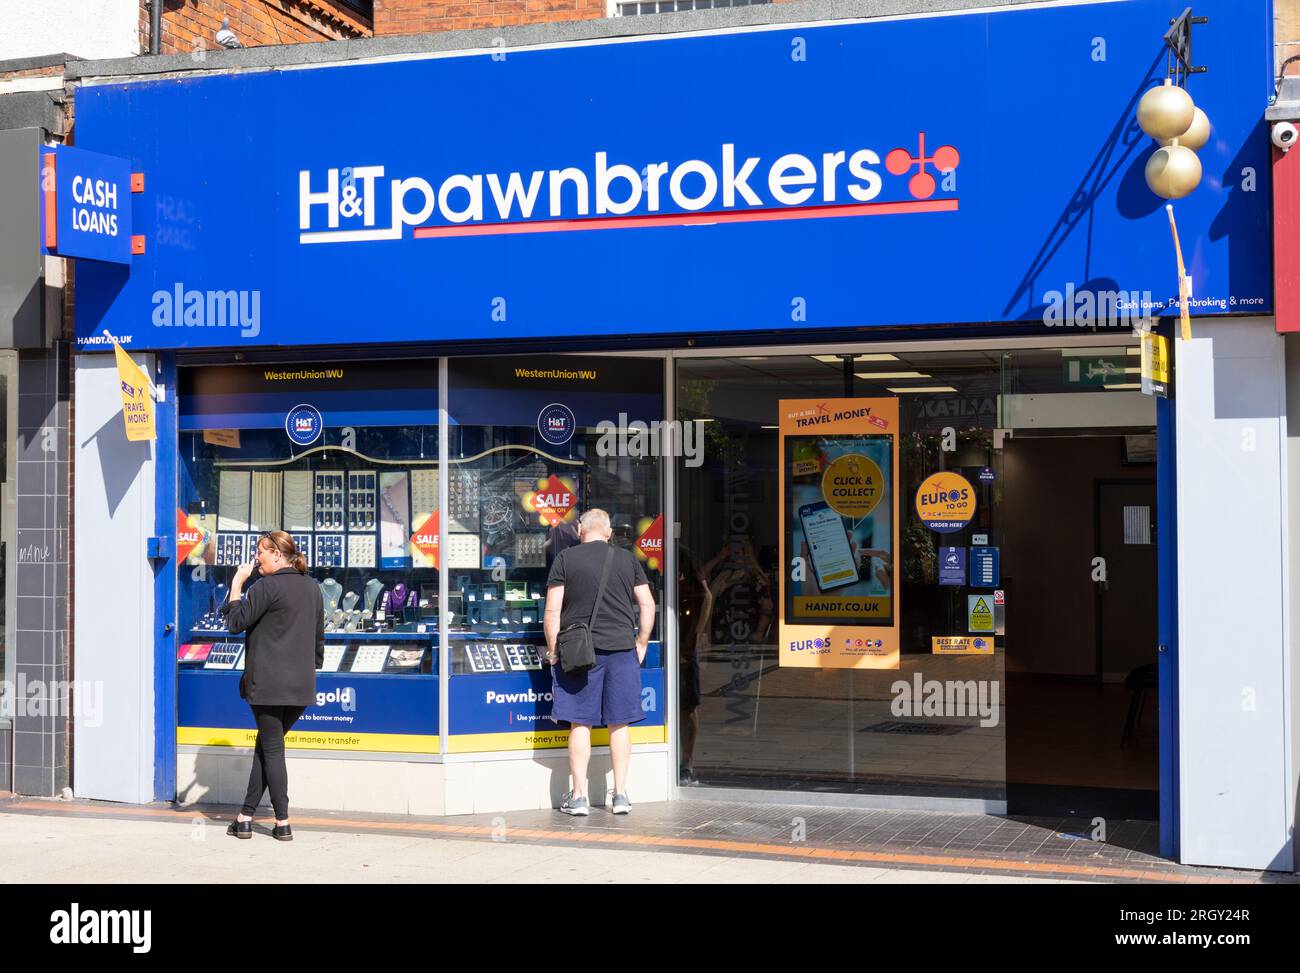 H&T Pawnbrokers Pawn shop on Scunthorpe High street Scunthorpe Town centre Scunthorpe North Lincolnshire England UK GB Europe Stock Photo